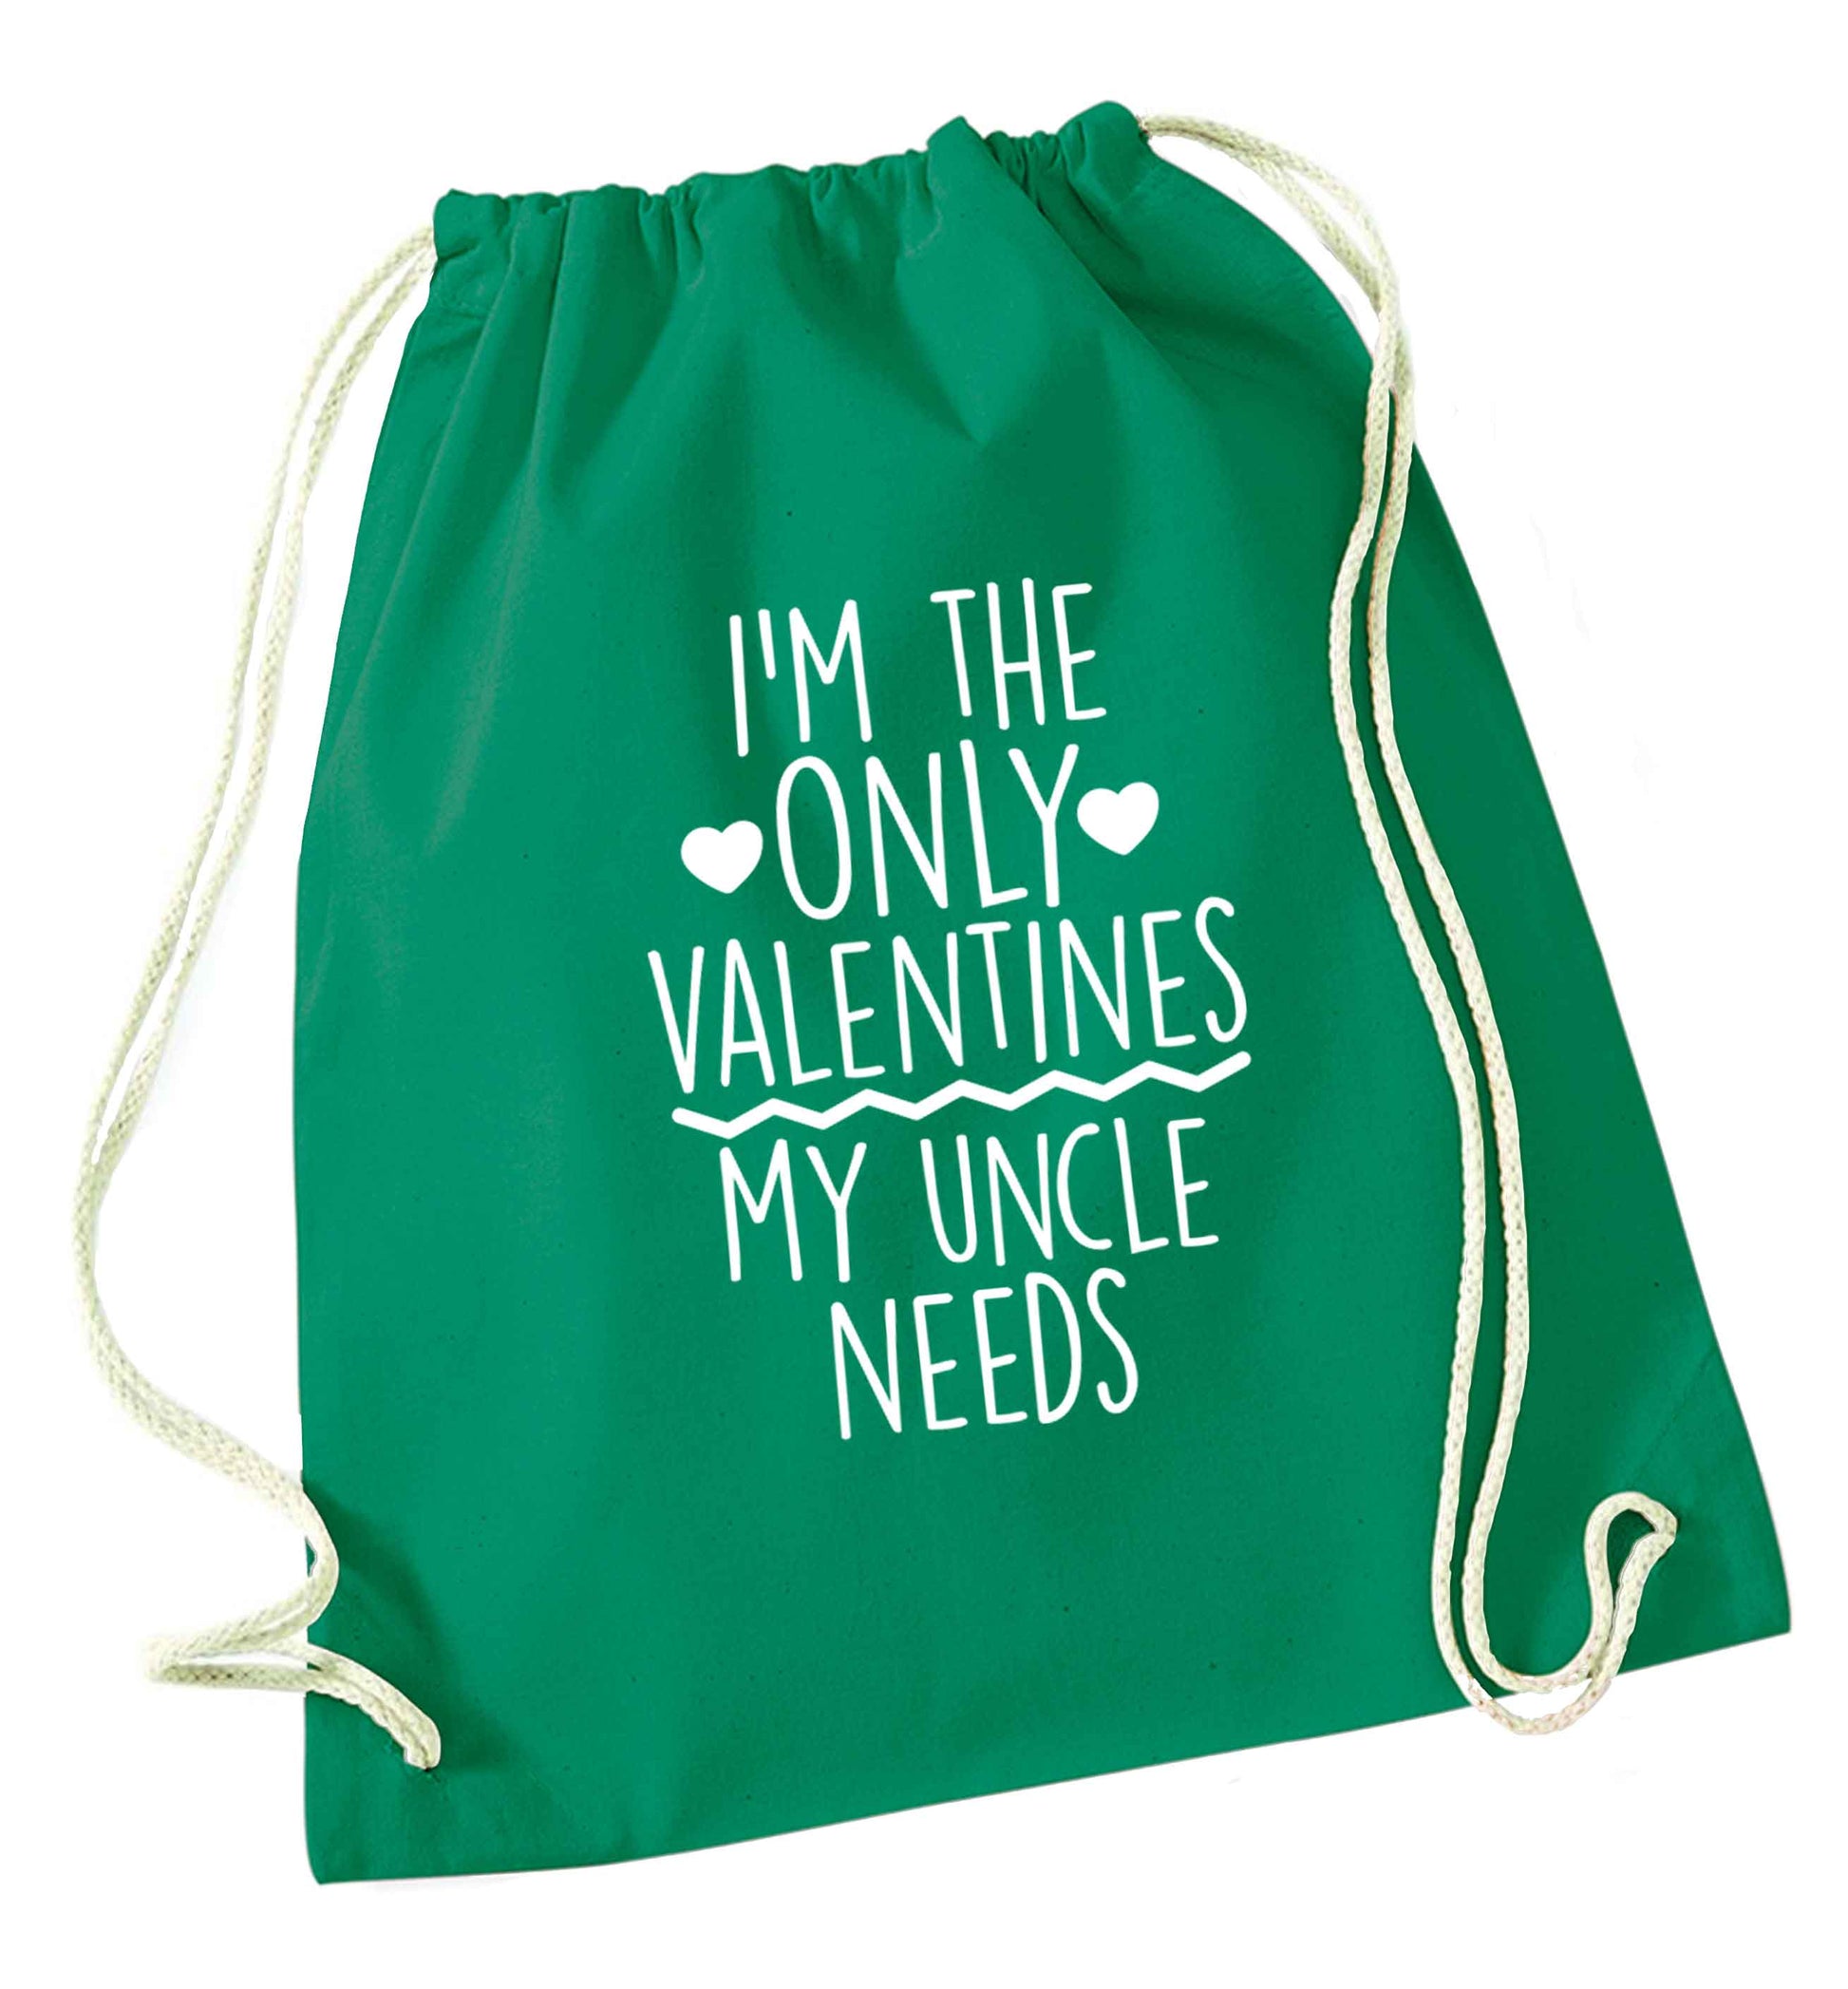 I'm the only valentines my uncle needs green drawstring bag